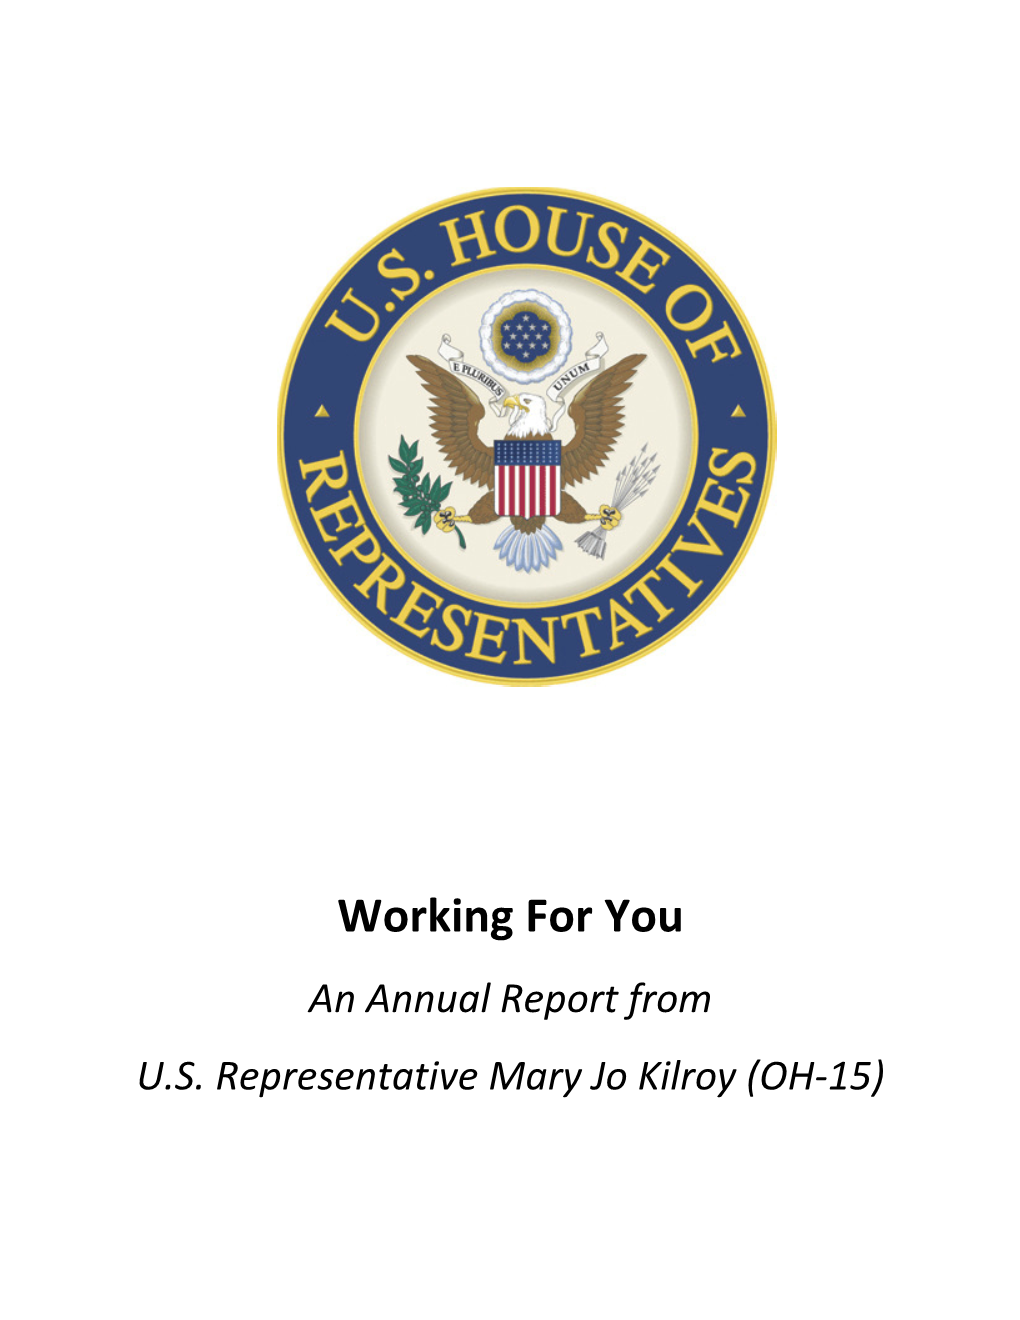 Working for You an Annual Report from U.S